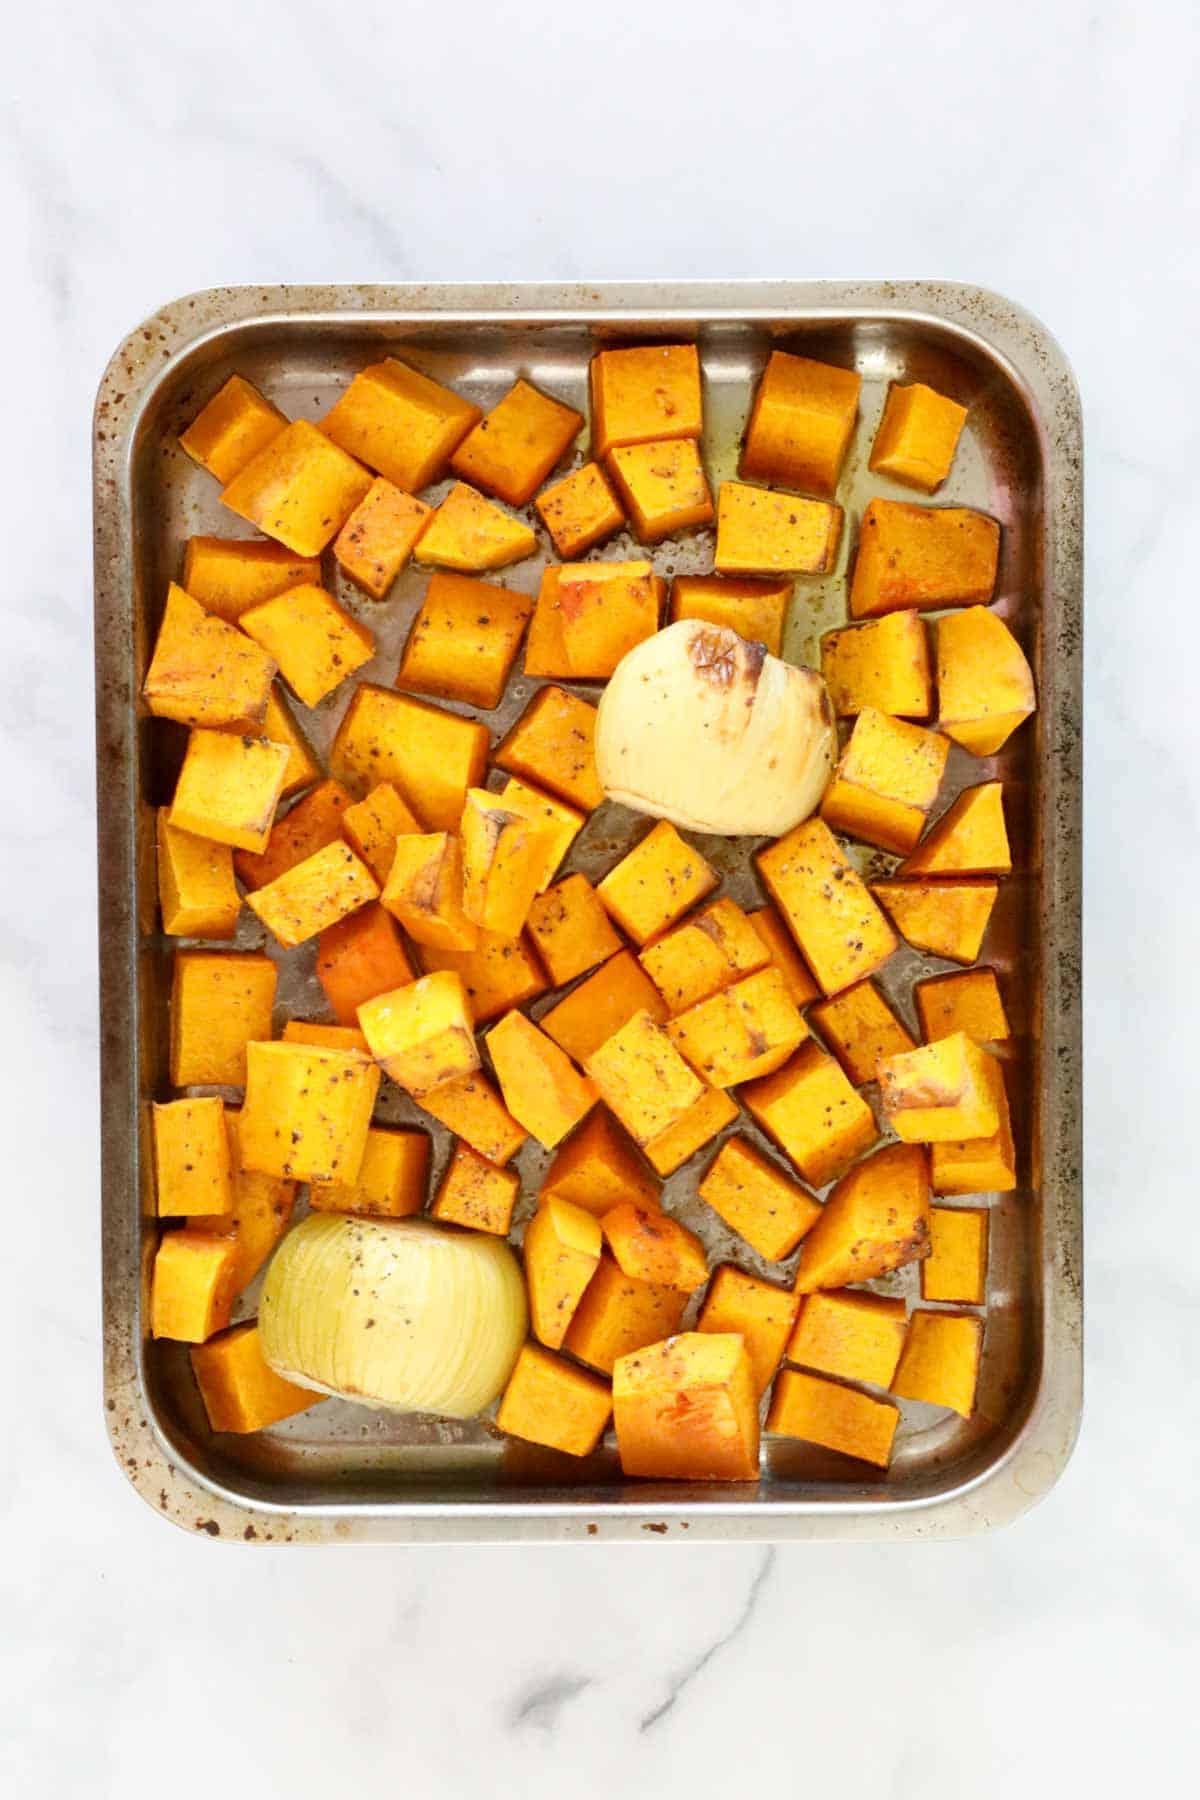 A tray of roasted pumpkin and onion.